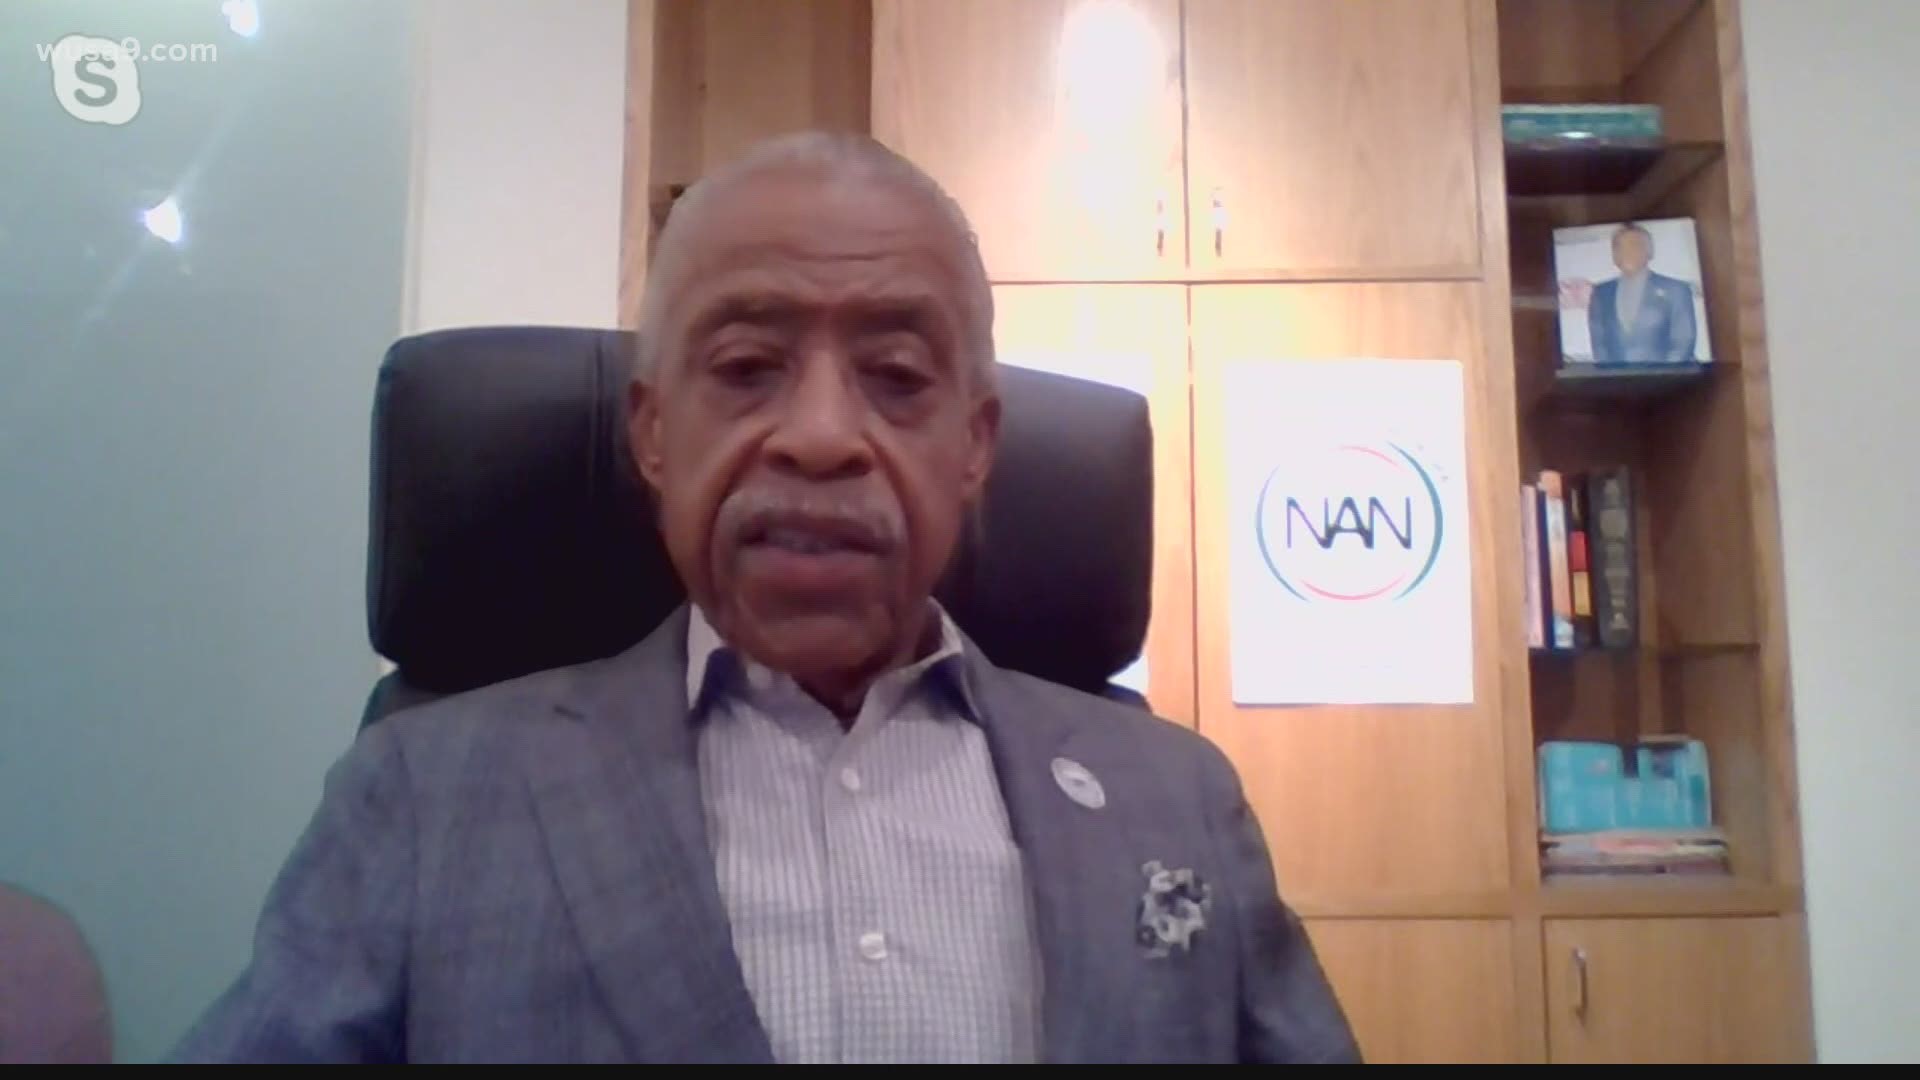 Bruce spoke with the Rev. Al Sharpton about the upcoming March. He shared how he sees it happening while we are in the middle of the pandemic